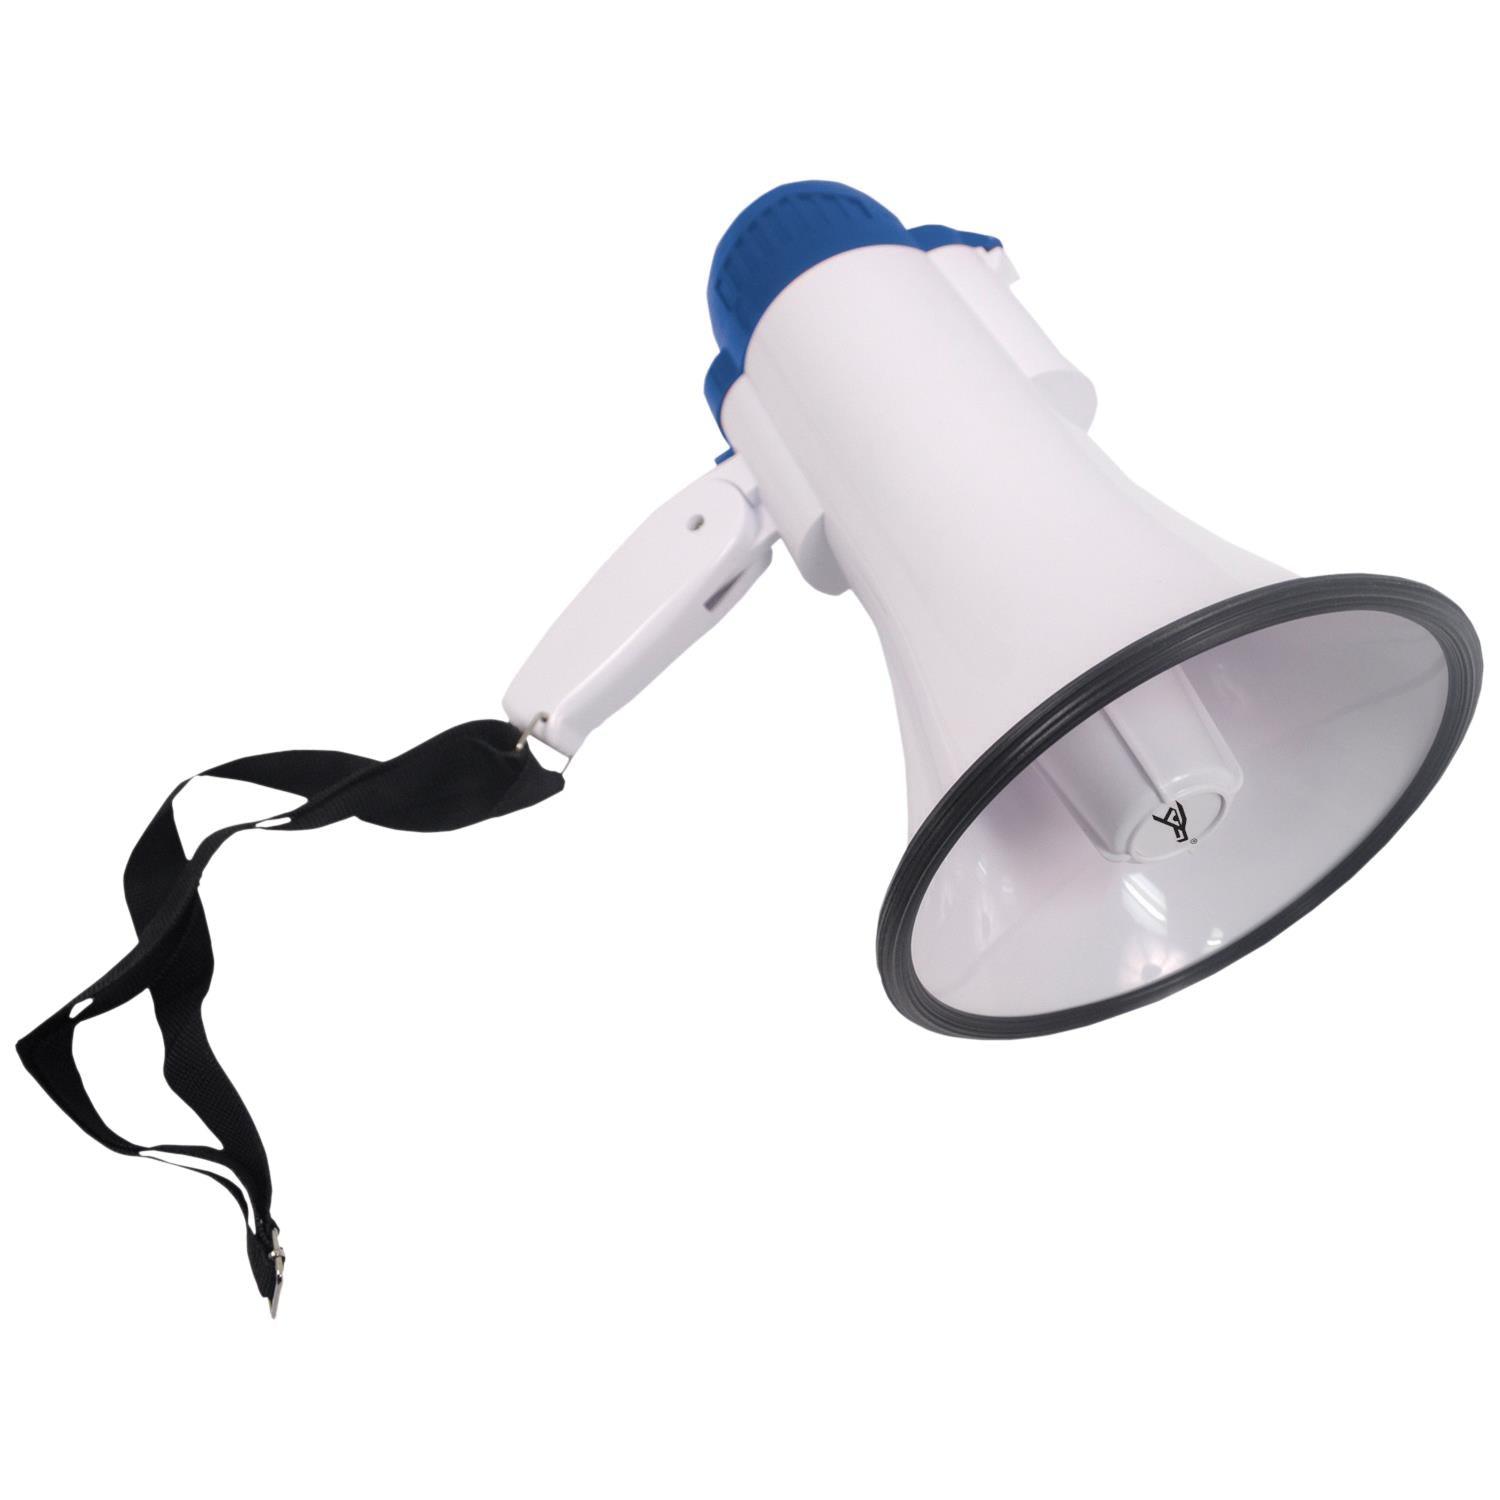 Eagle 15W Handheld Megaphone with Foldable Hand Grip - DY Pro Audio